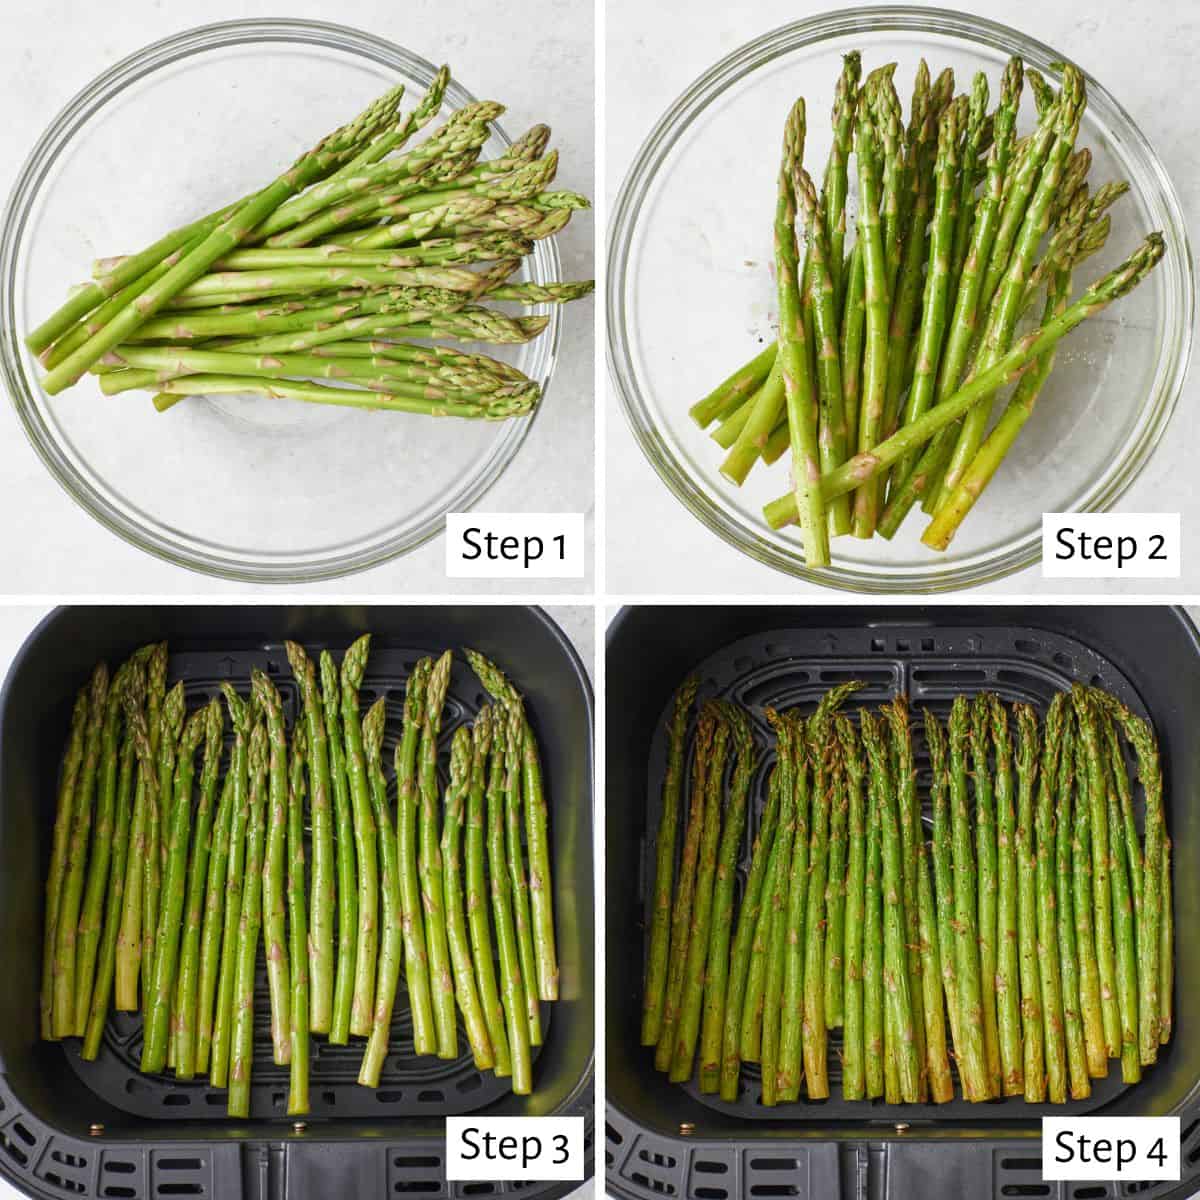 4 image collage making recipe: 1- trimmed asparagus in a bowl, 2- after tossing with oil and spices, 3- spread in a single layer in an air fryer basket before frying, 4- after air frying.